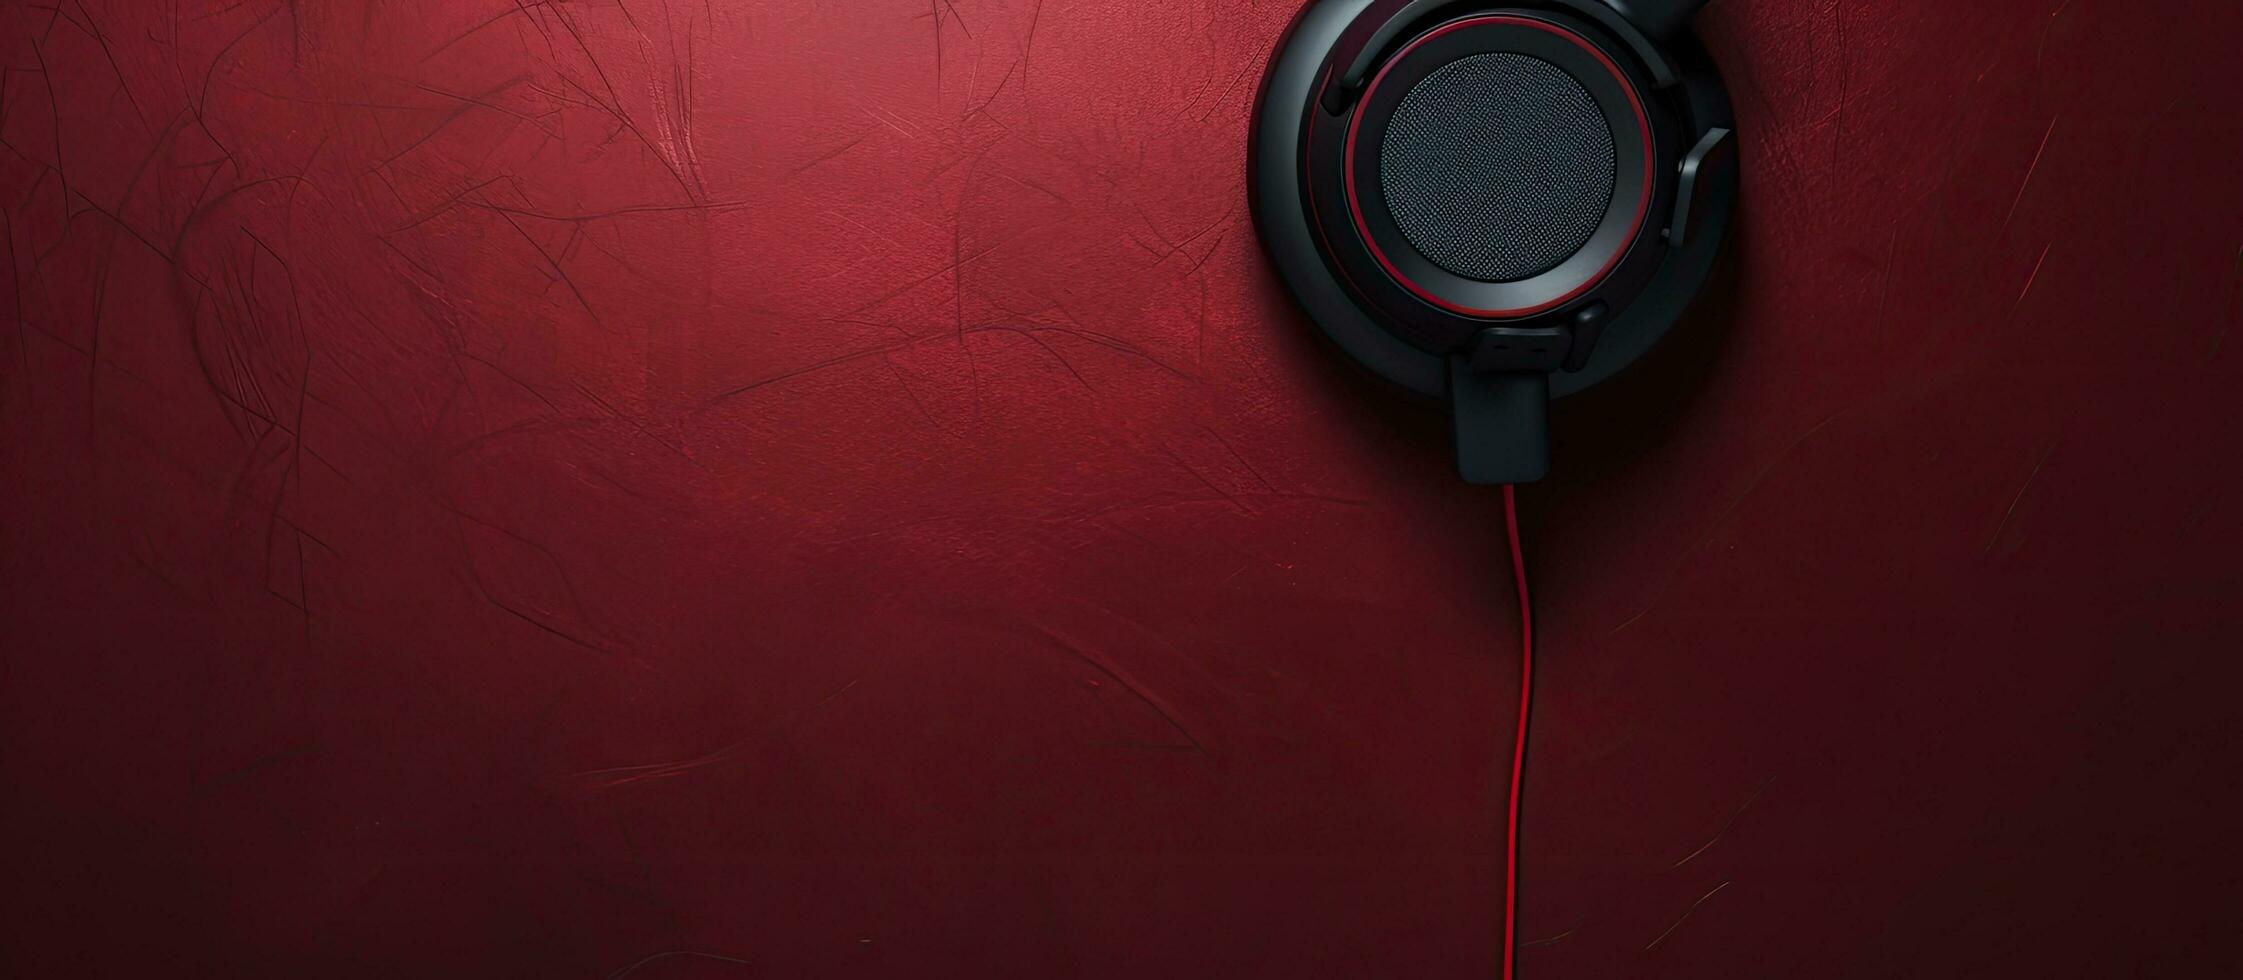 Photo of a pair of headphones hanging on a vibrant red wall with copy space